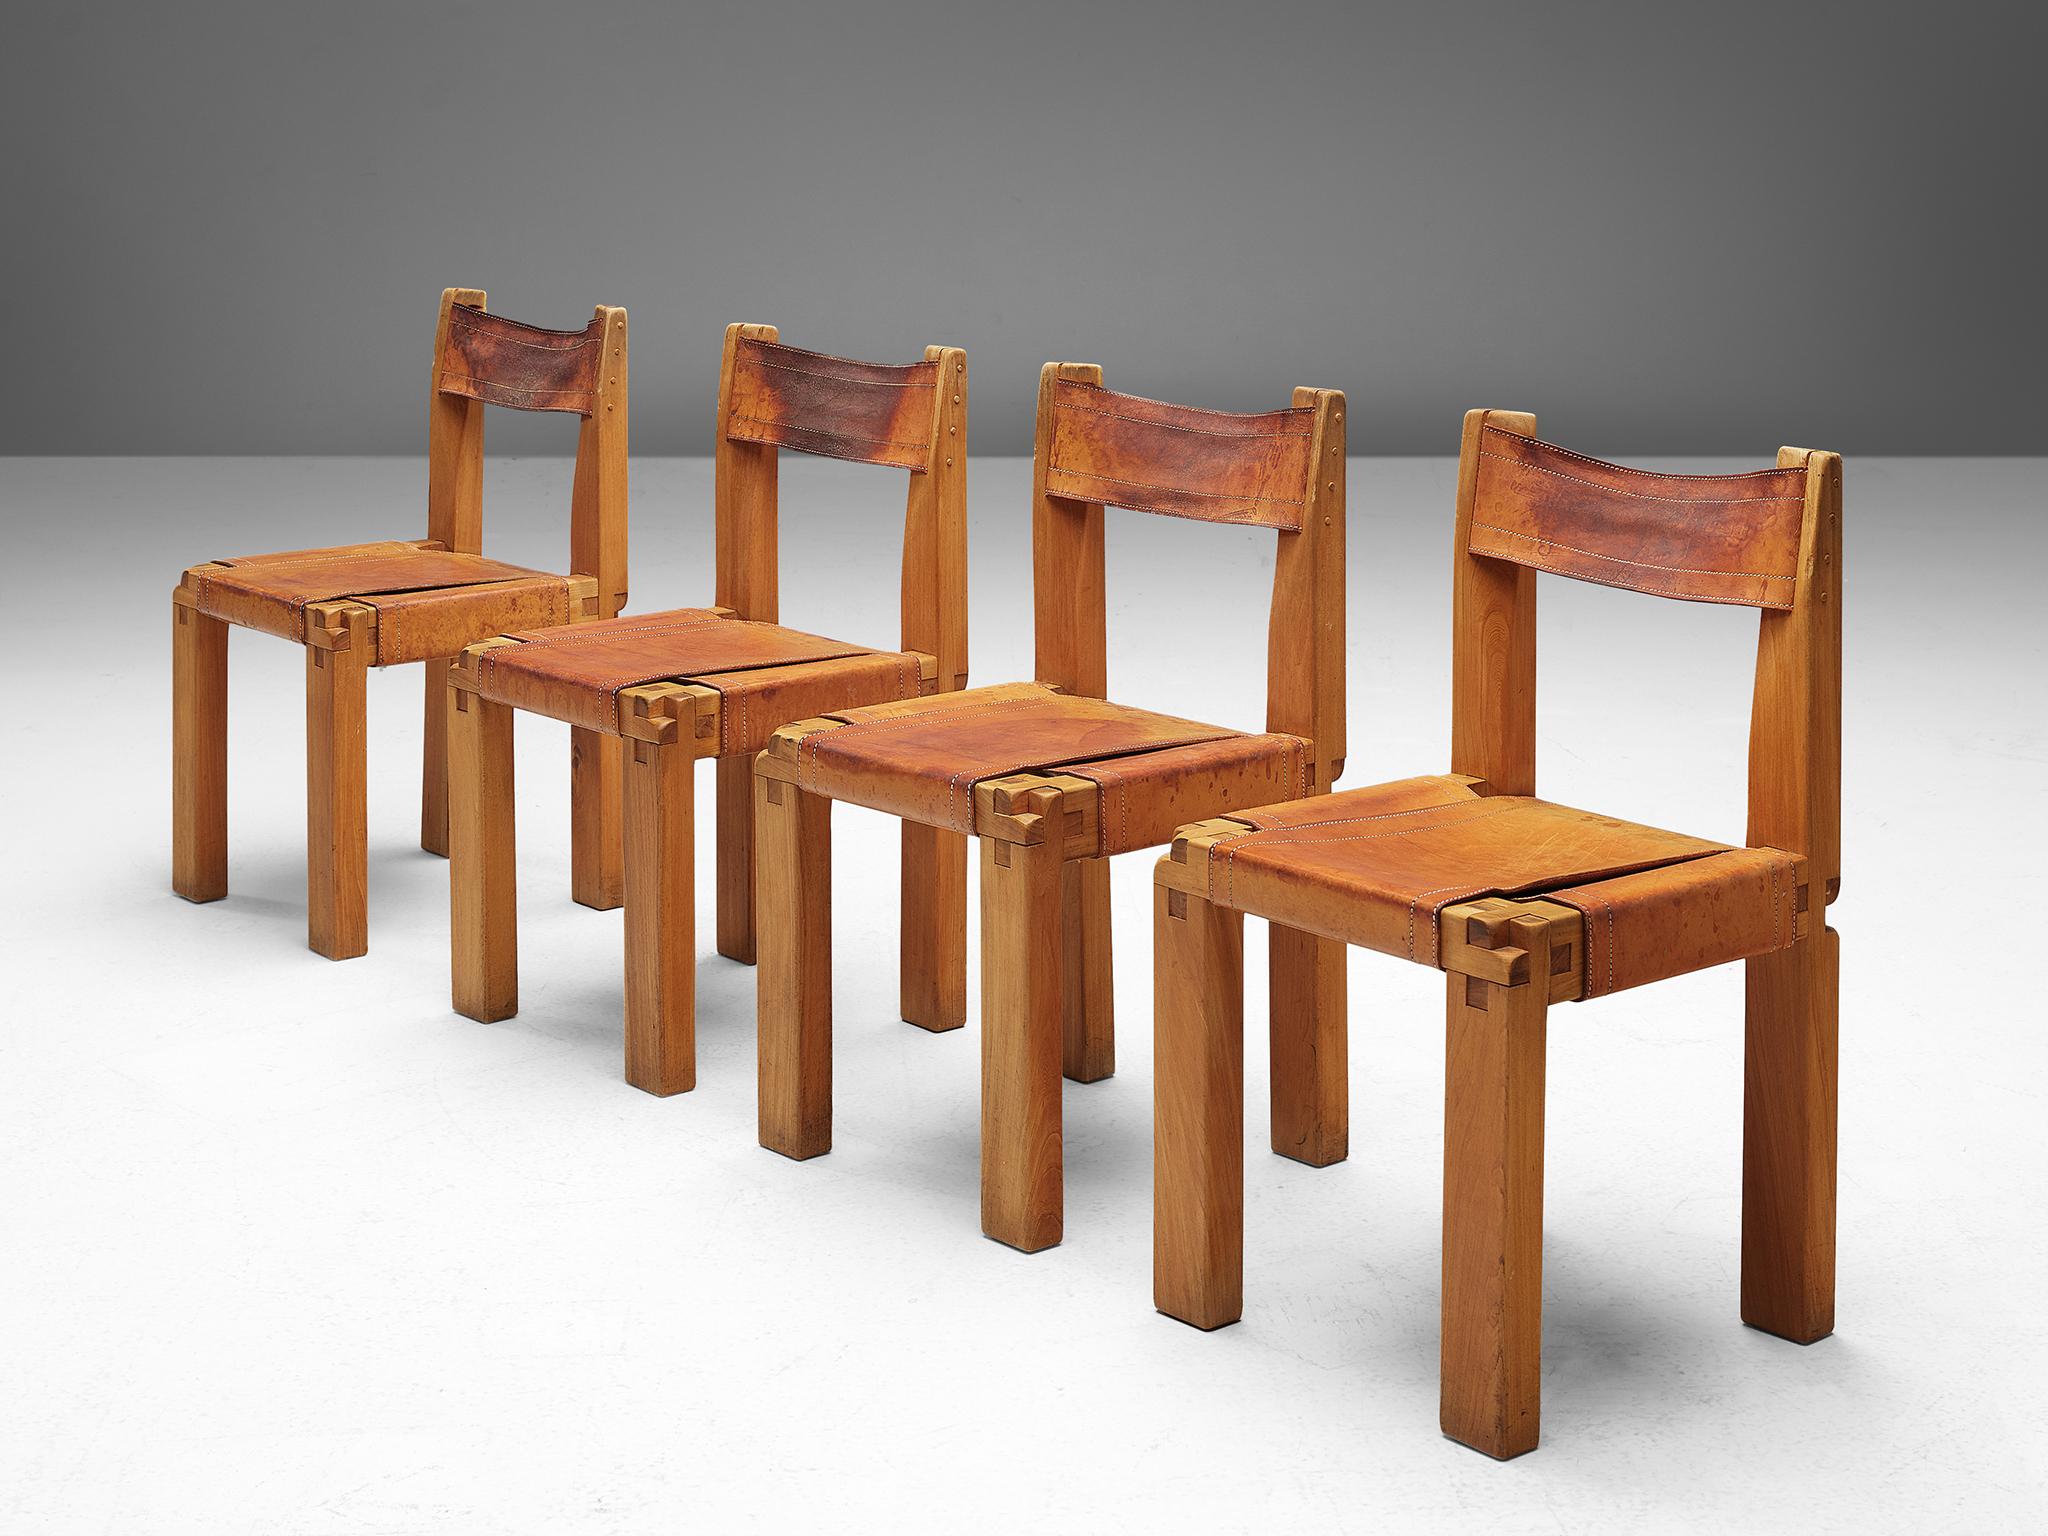 Pierre Chapo, set of four dining chairs, model S11, elm and leather, France, circa 1966. 

A set of four chairs in solid elmwood with black saddle leather seating and back, designed by French designer Pierre Chapo. These chairs have a cubic design